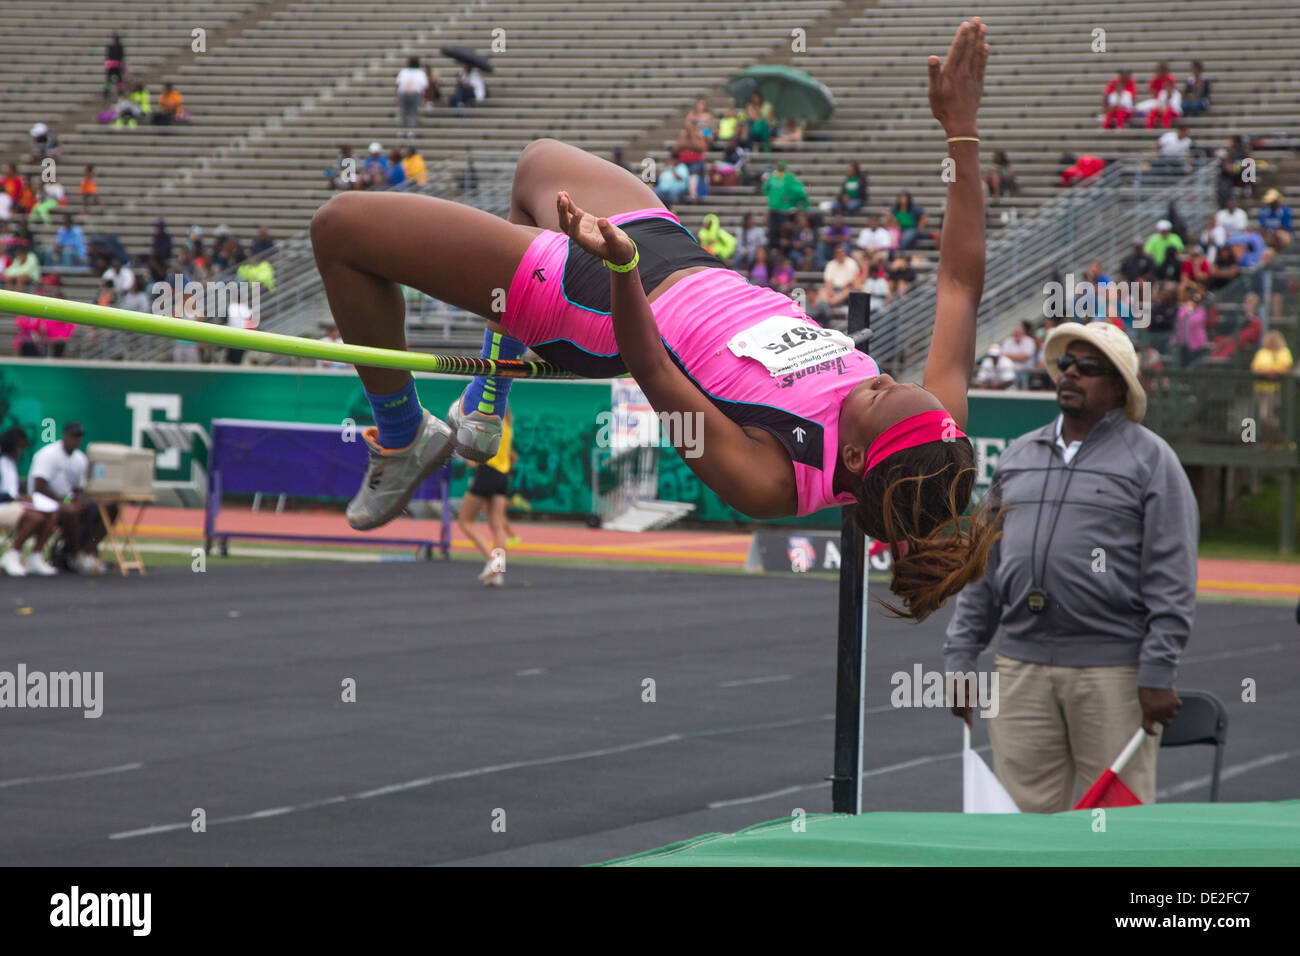 Ypsilanti, Michigan - High jump competition during the track and field events at the AAU Junior Olympic Games. Stock Photo